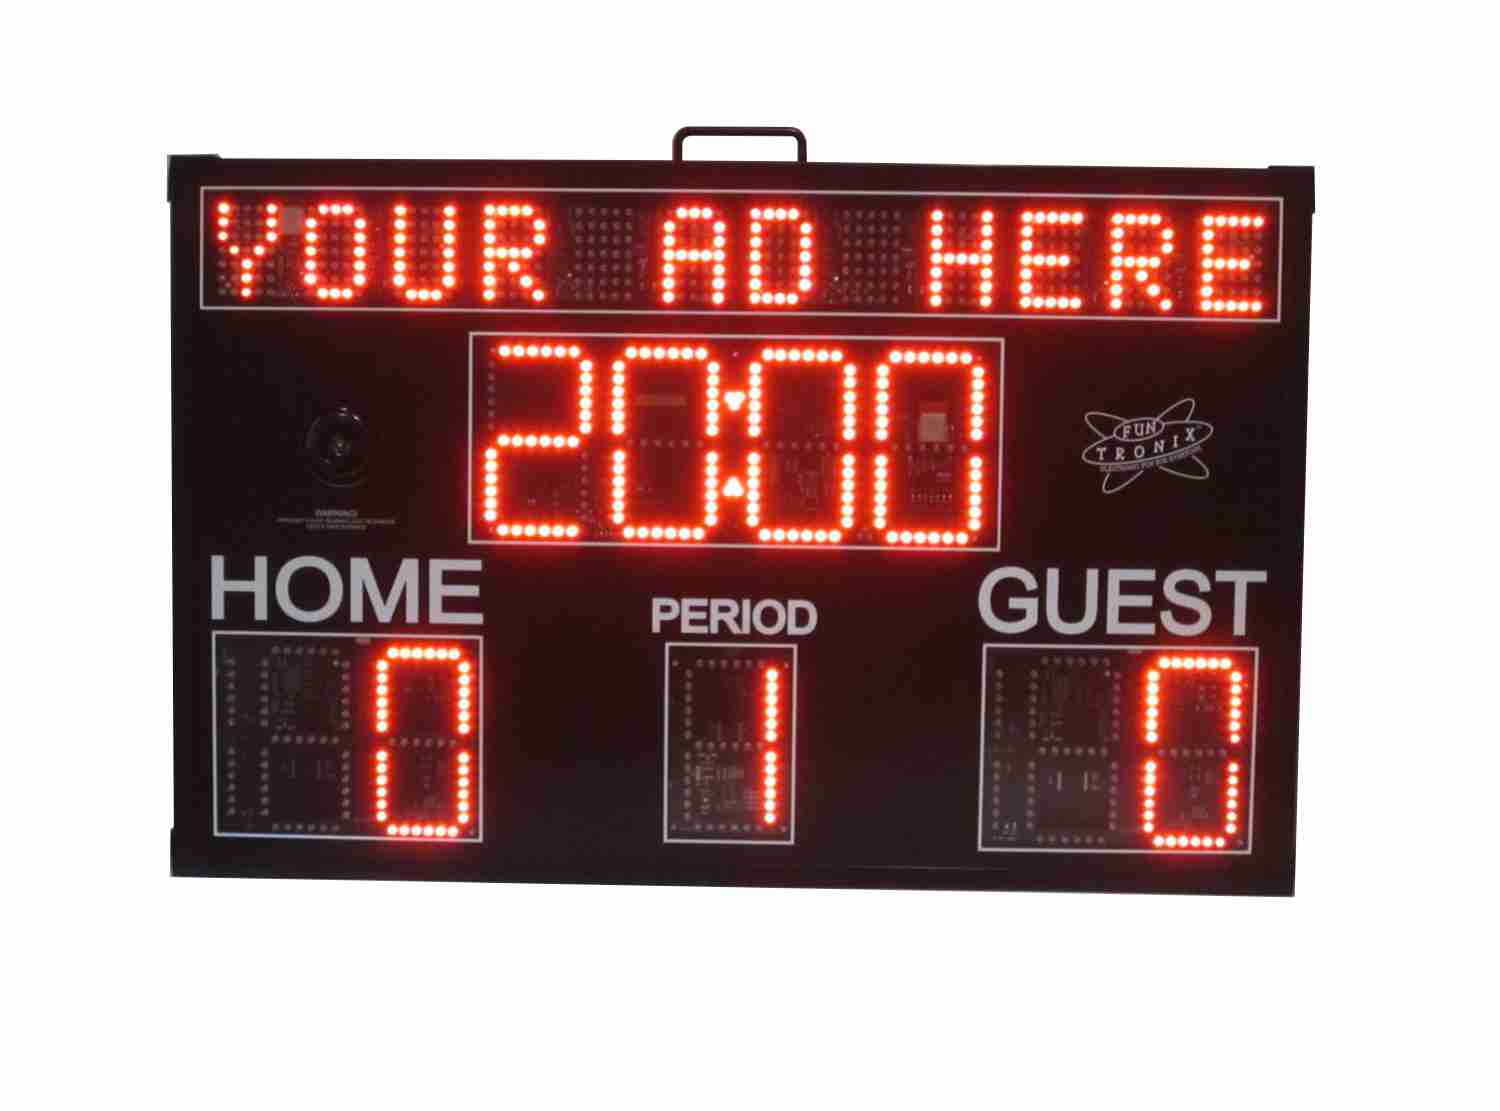 SNT-440 Large Scoreboard with Messaging